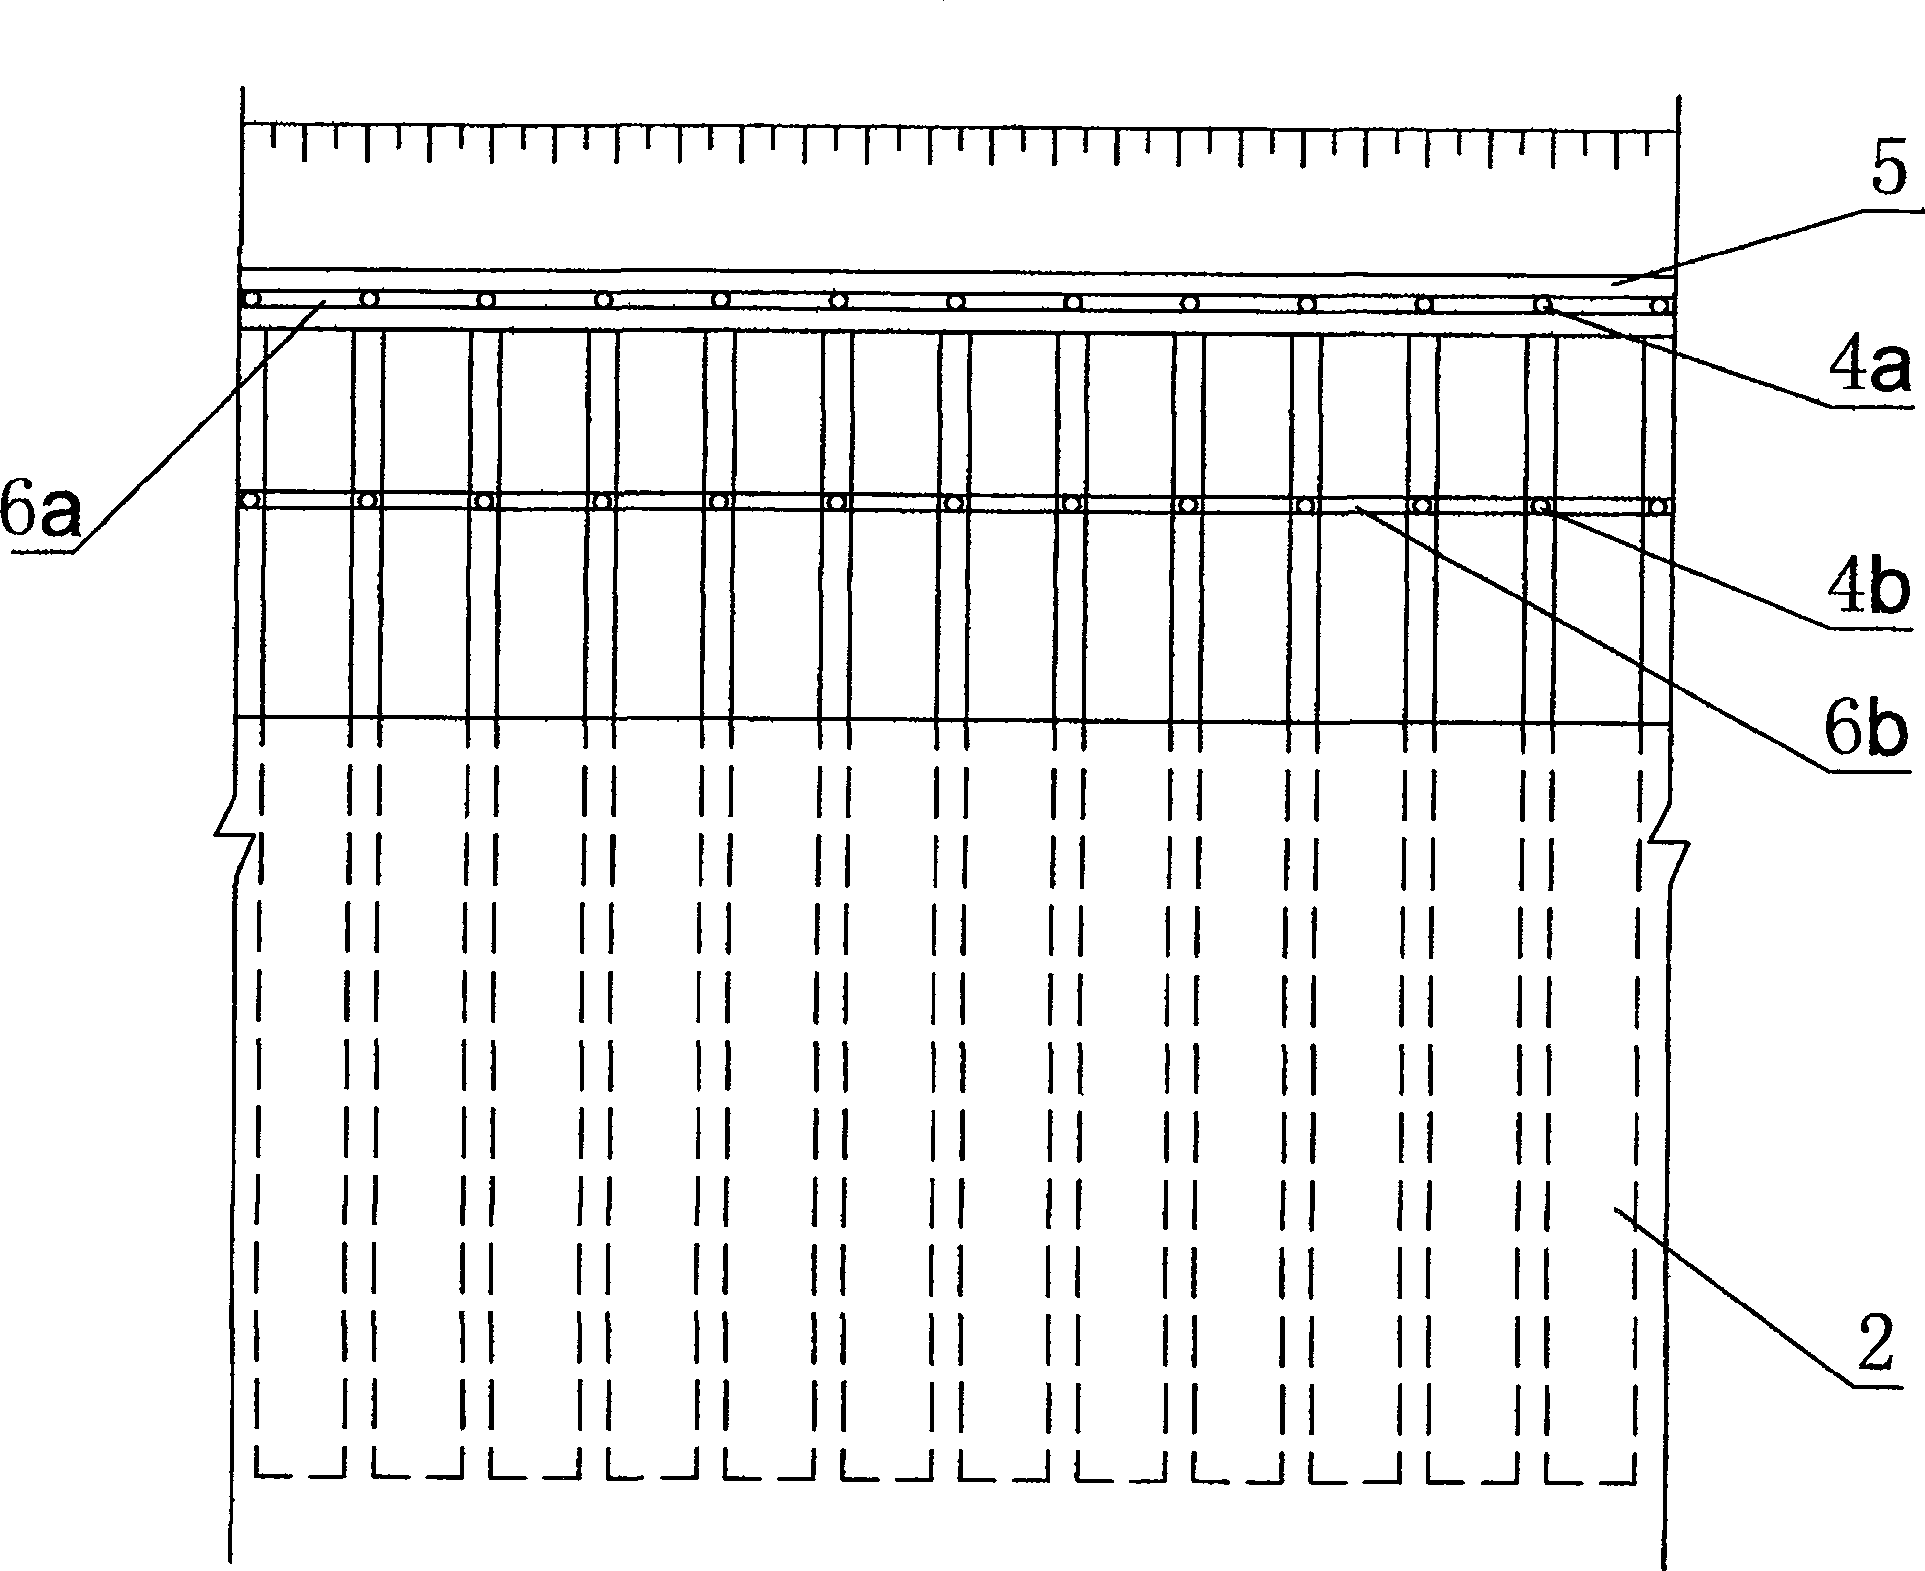 A pile-anchor foundation ditch supporting construction method